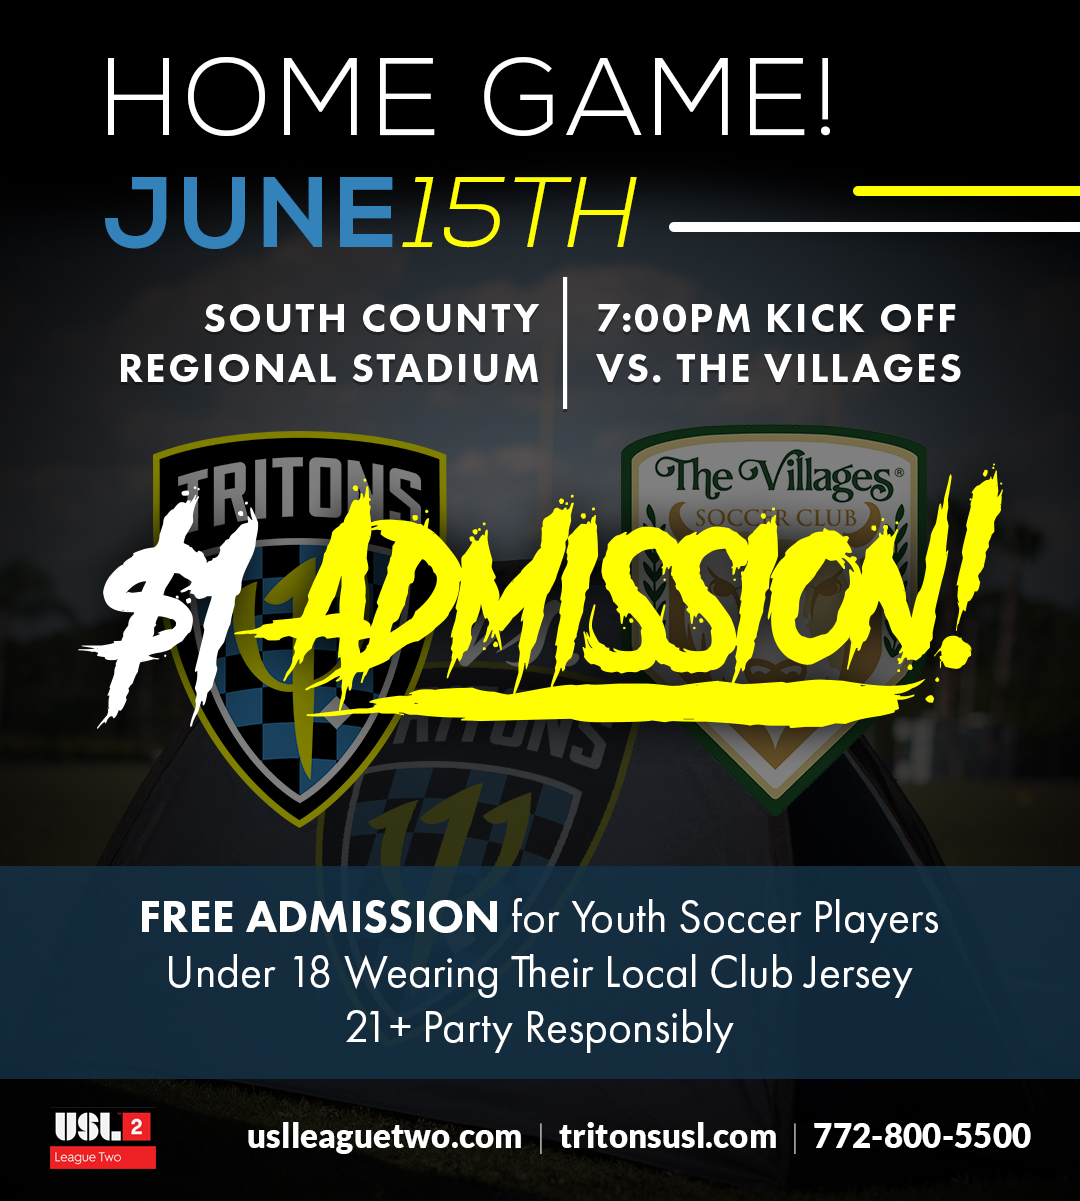 Game Promo VS The Villages 2